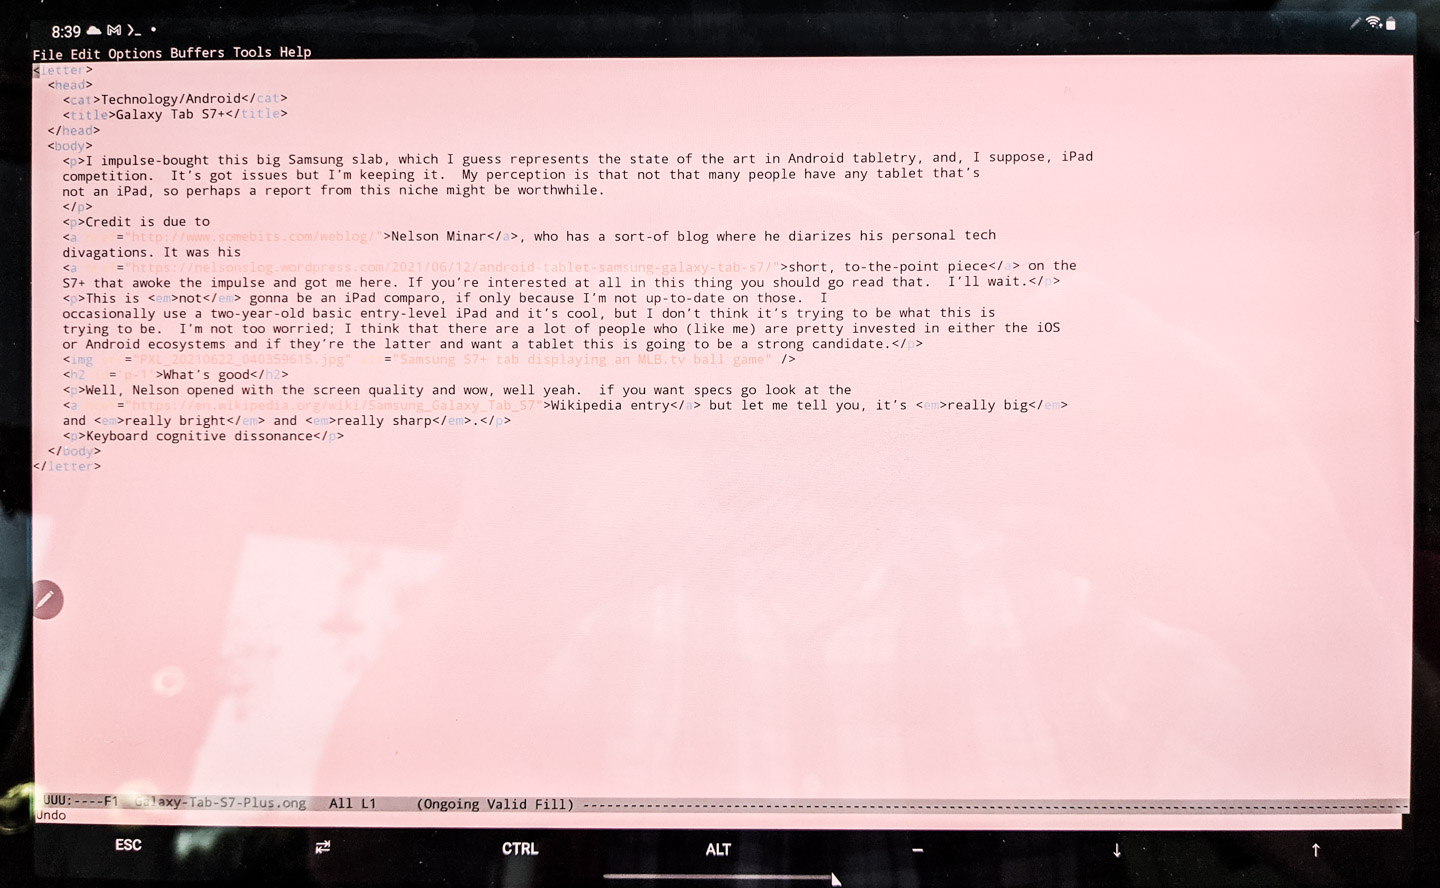 Emacs running on the Galaxy Tab S7+